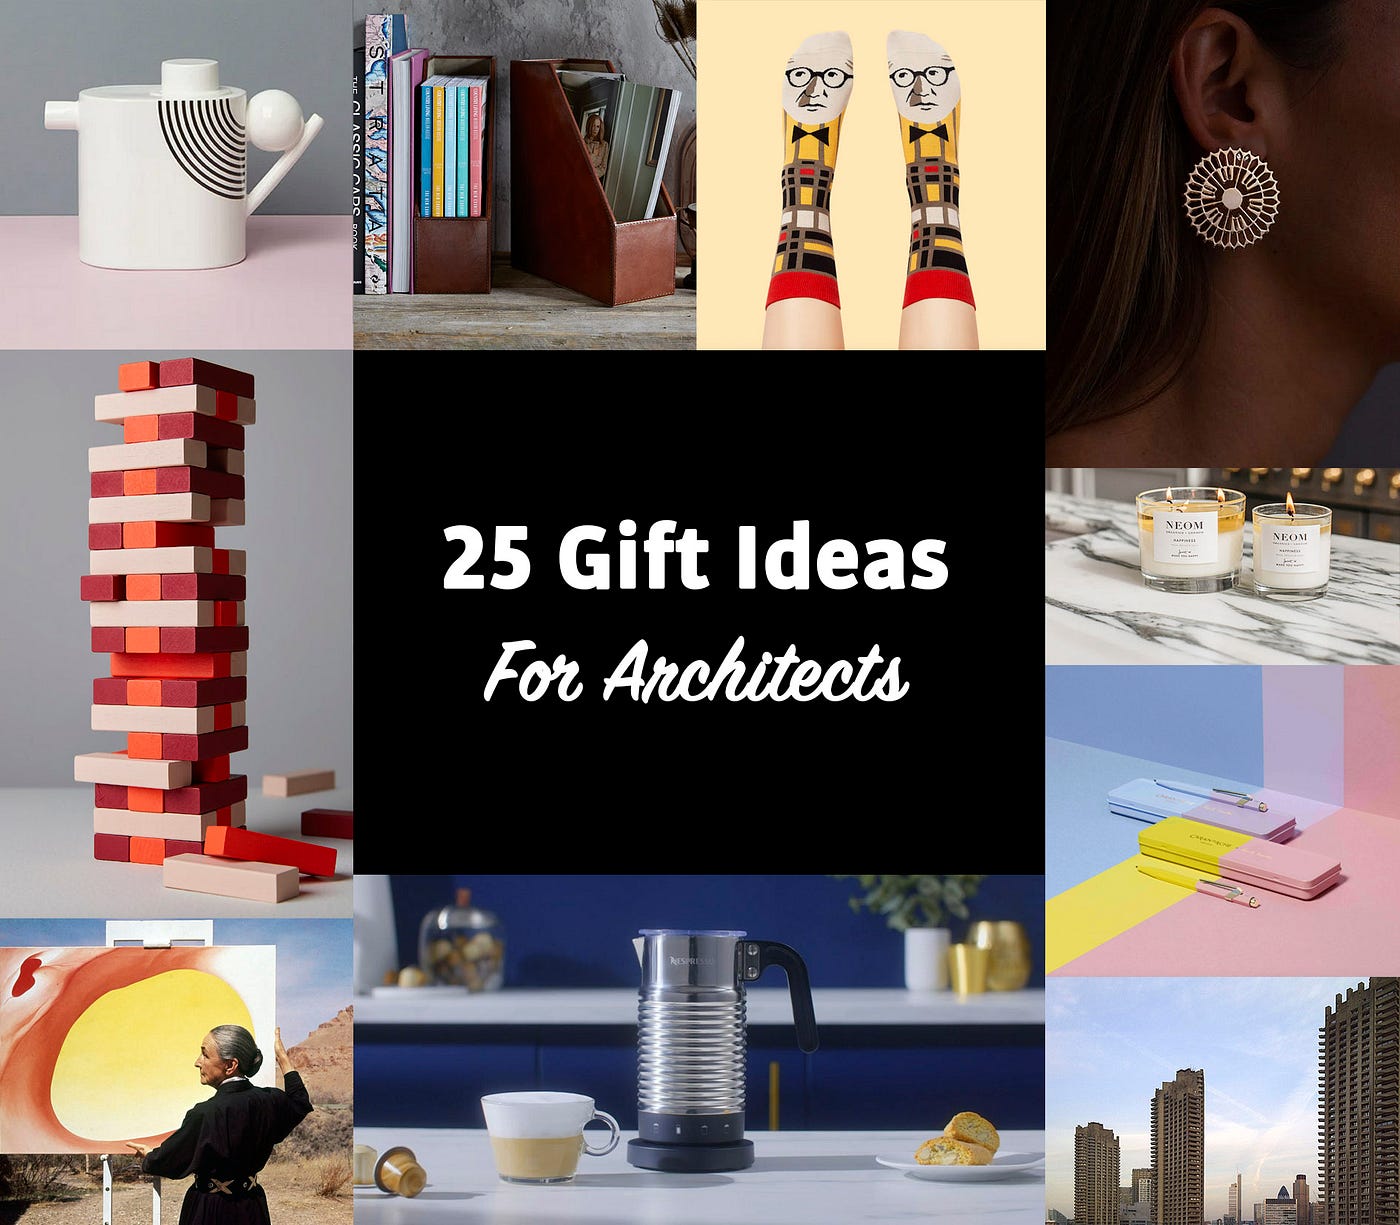 25 Gift Ideas For Architects – Architectour Guide